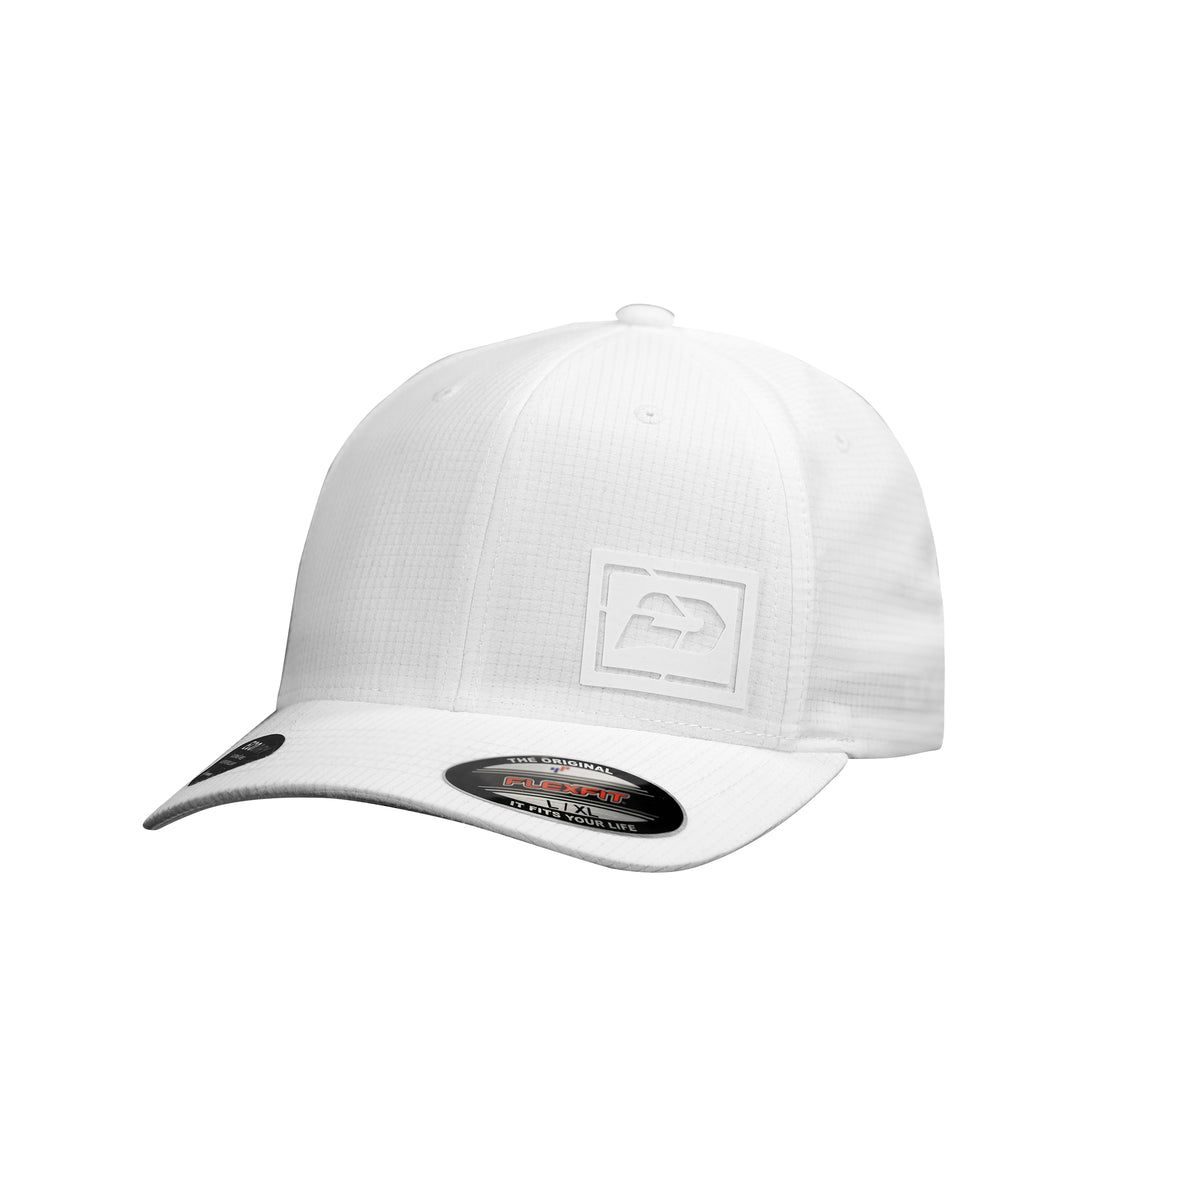 3D ICON Hydro-Grid | – WHITE Hat pushpaintball Stretch